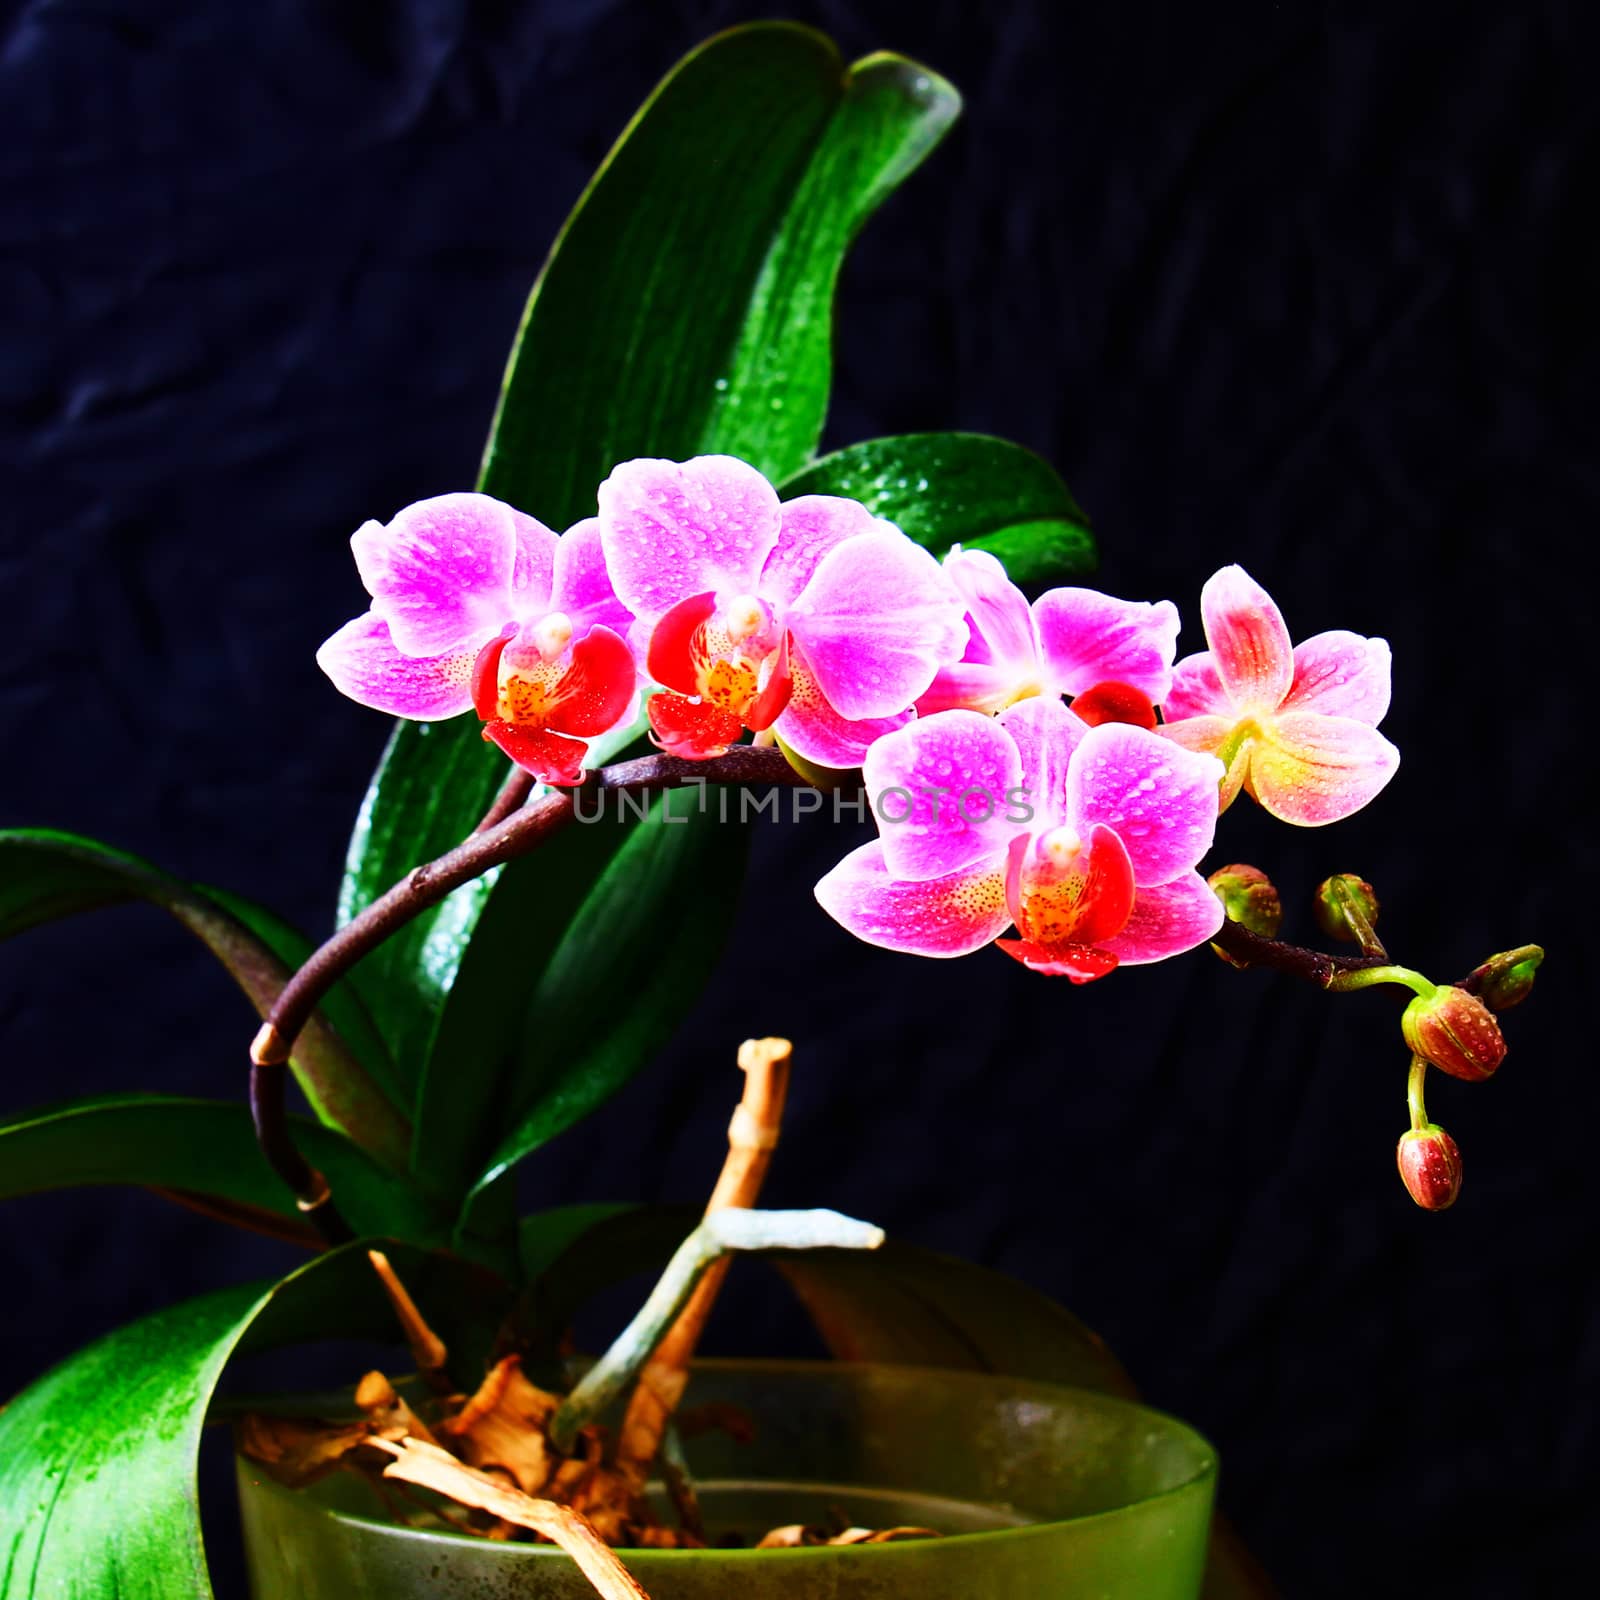 Phalaenopsis in blossom, close up by Jindrich_Blecha